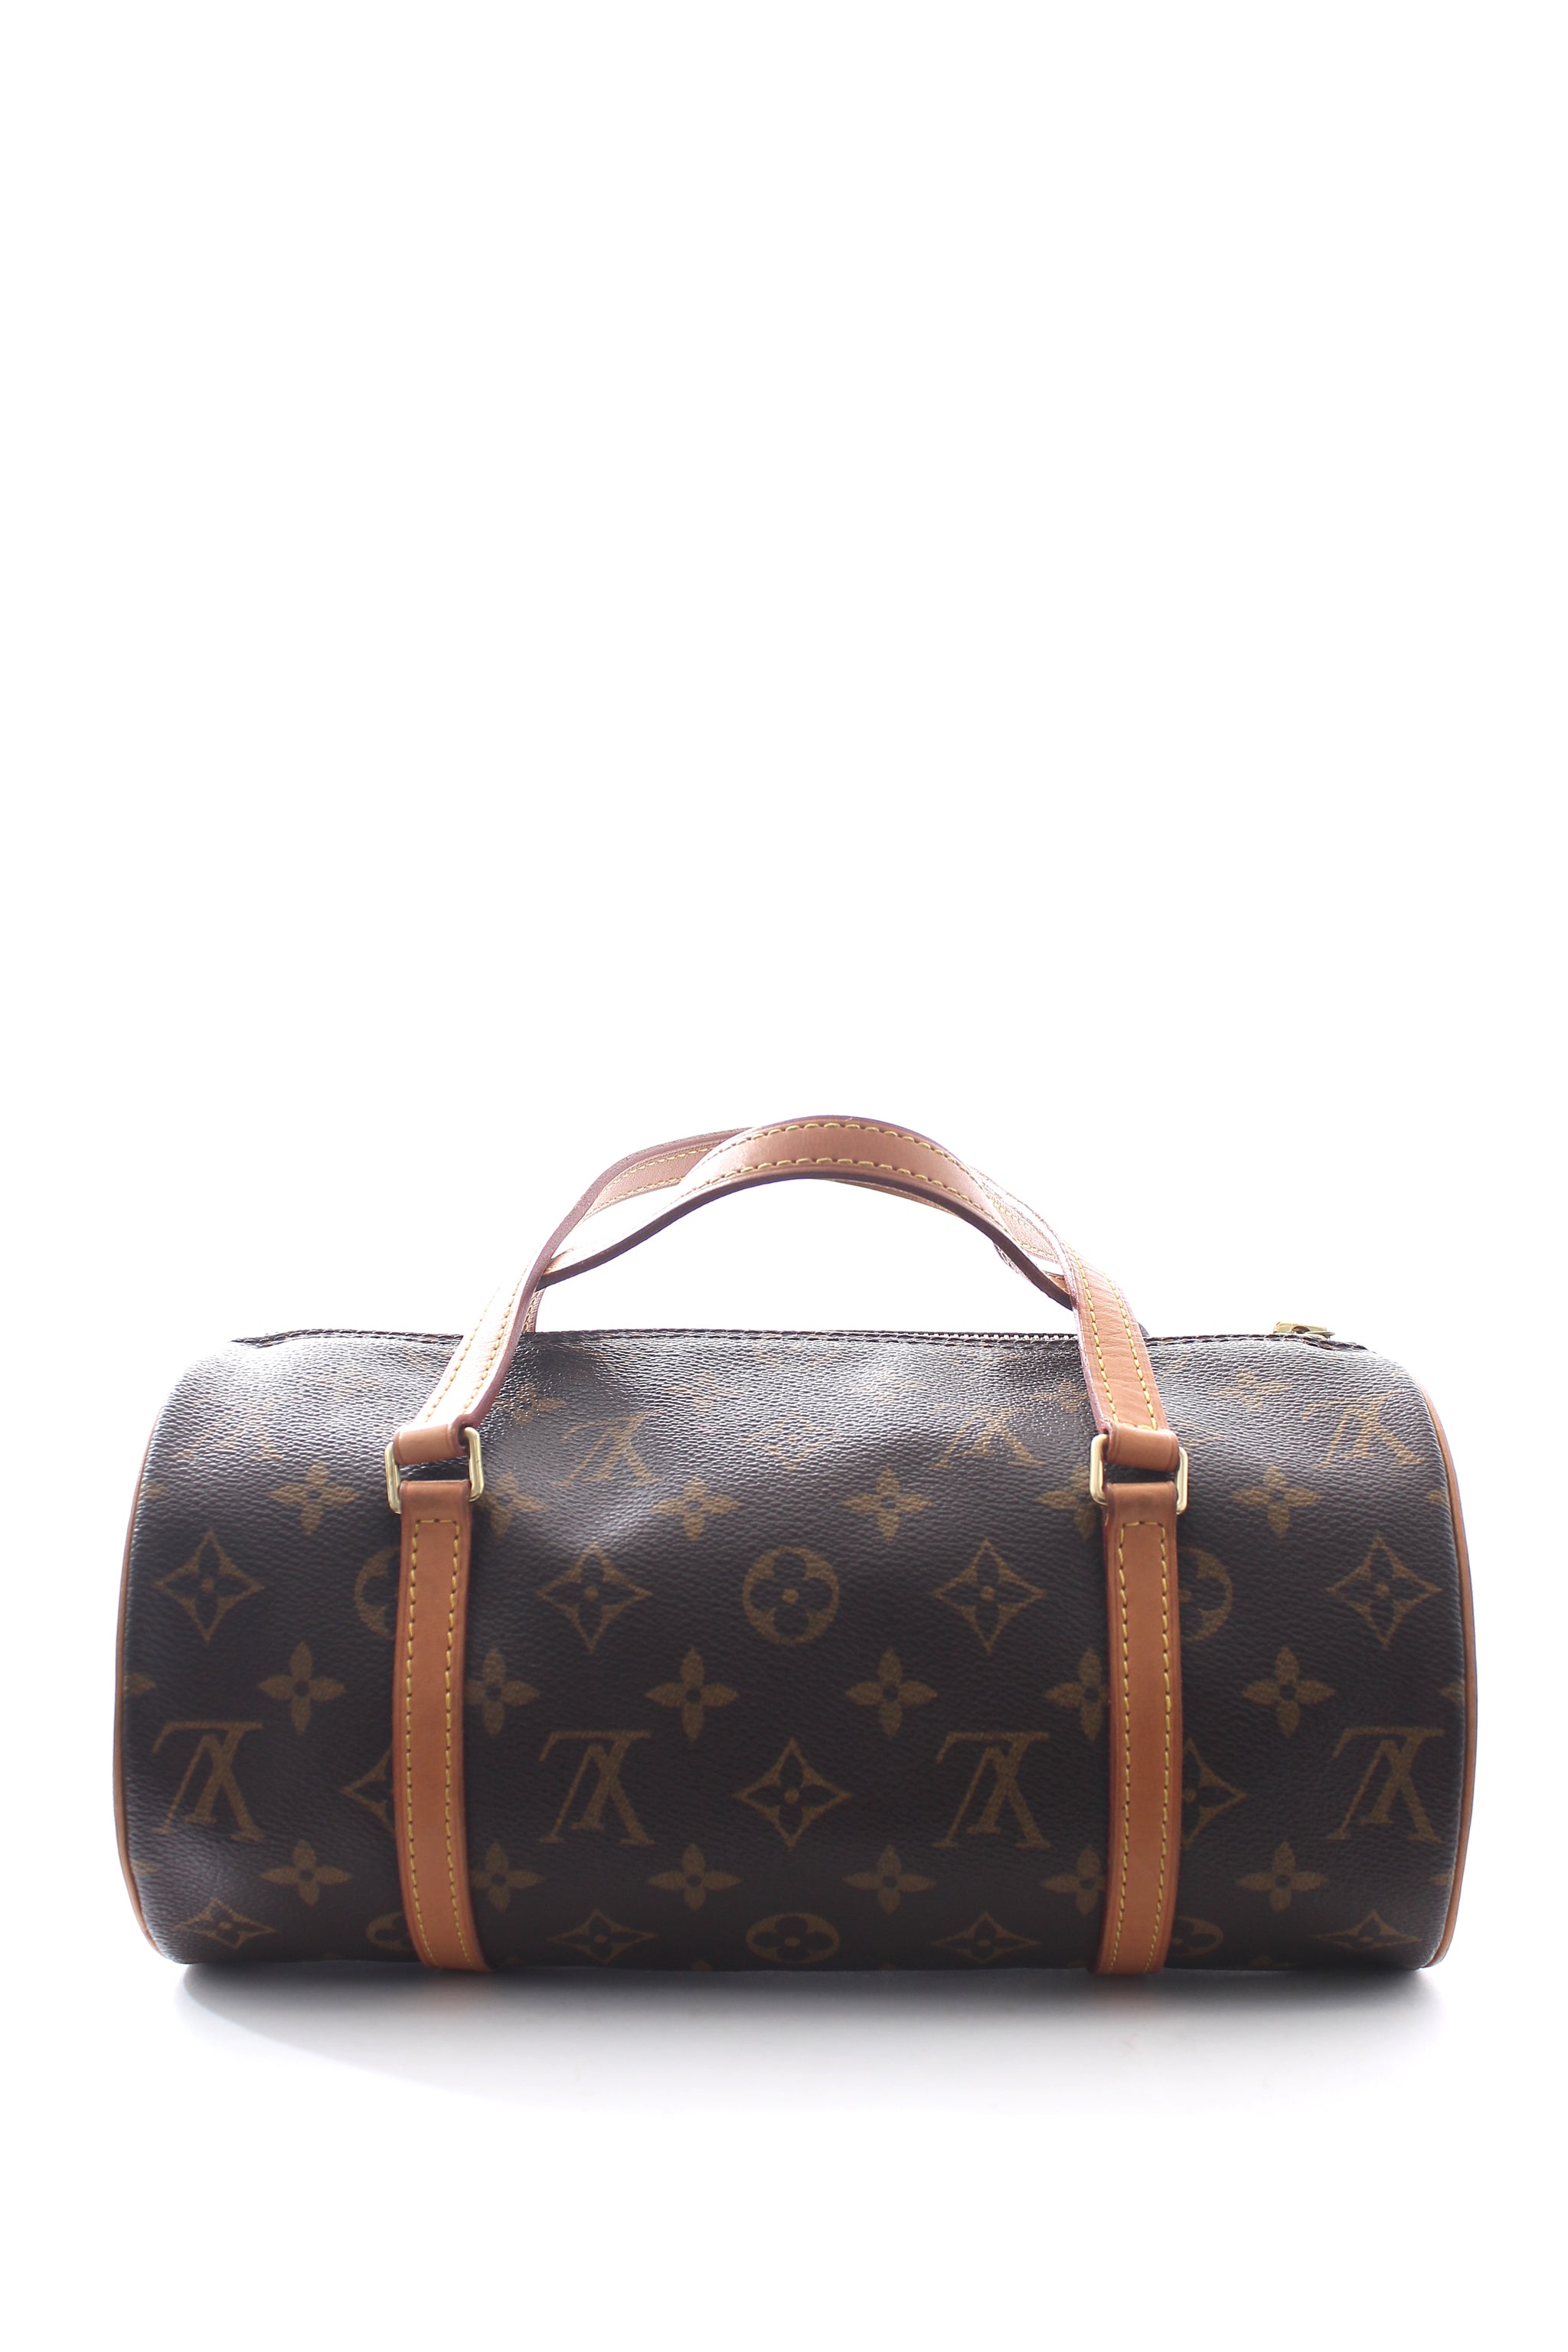 Louis Vuitton Hot Springs Backpack Patent Leather Handbags M53545 $145